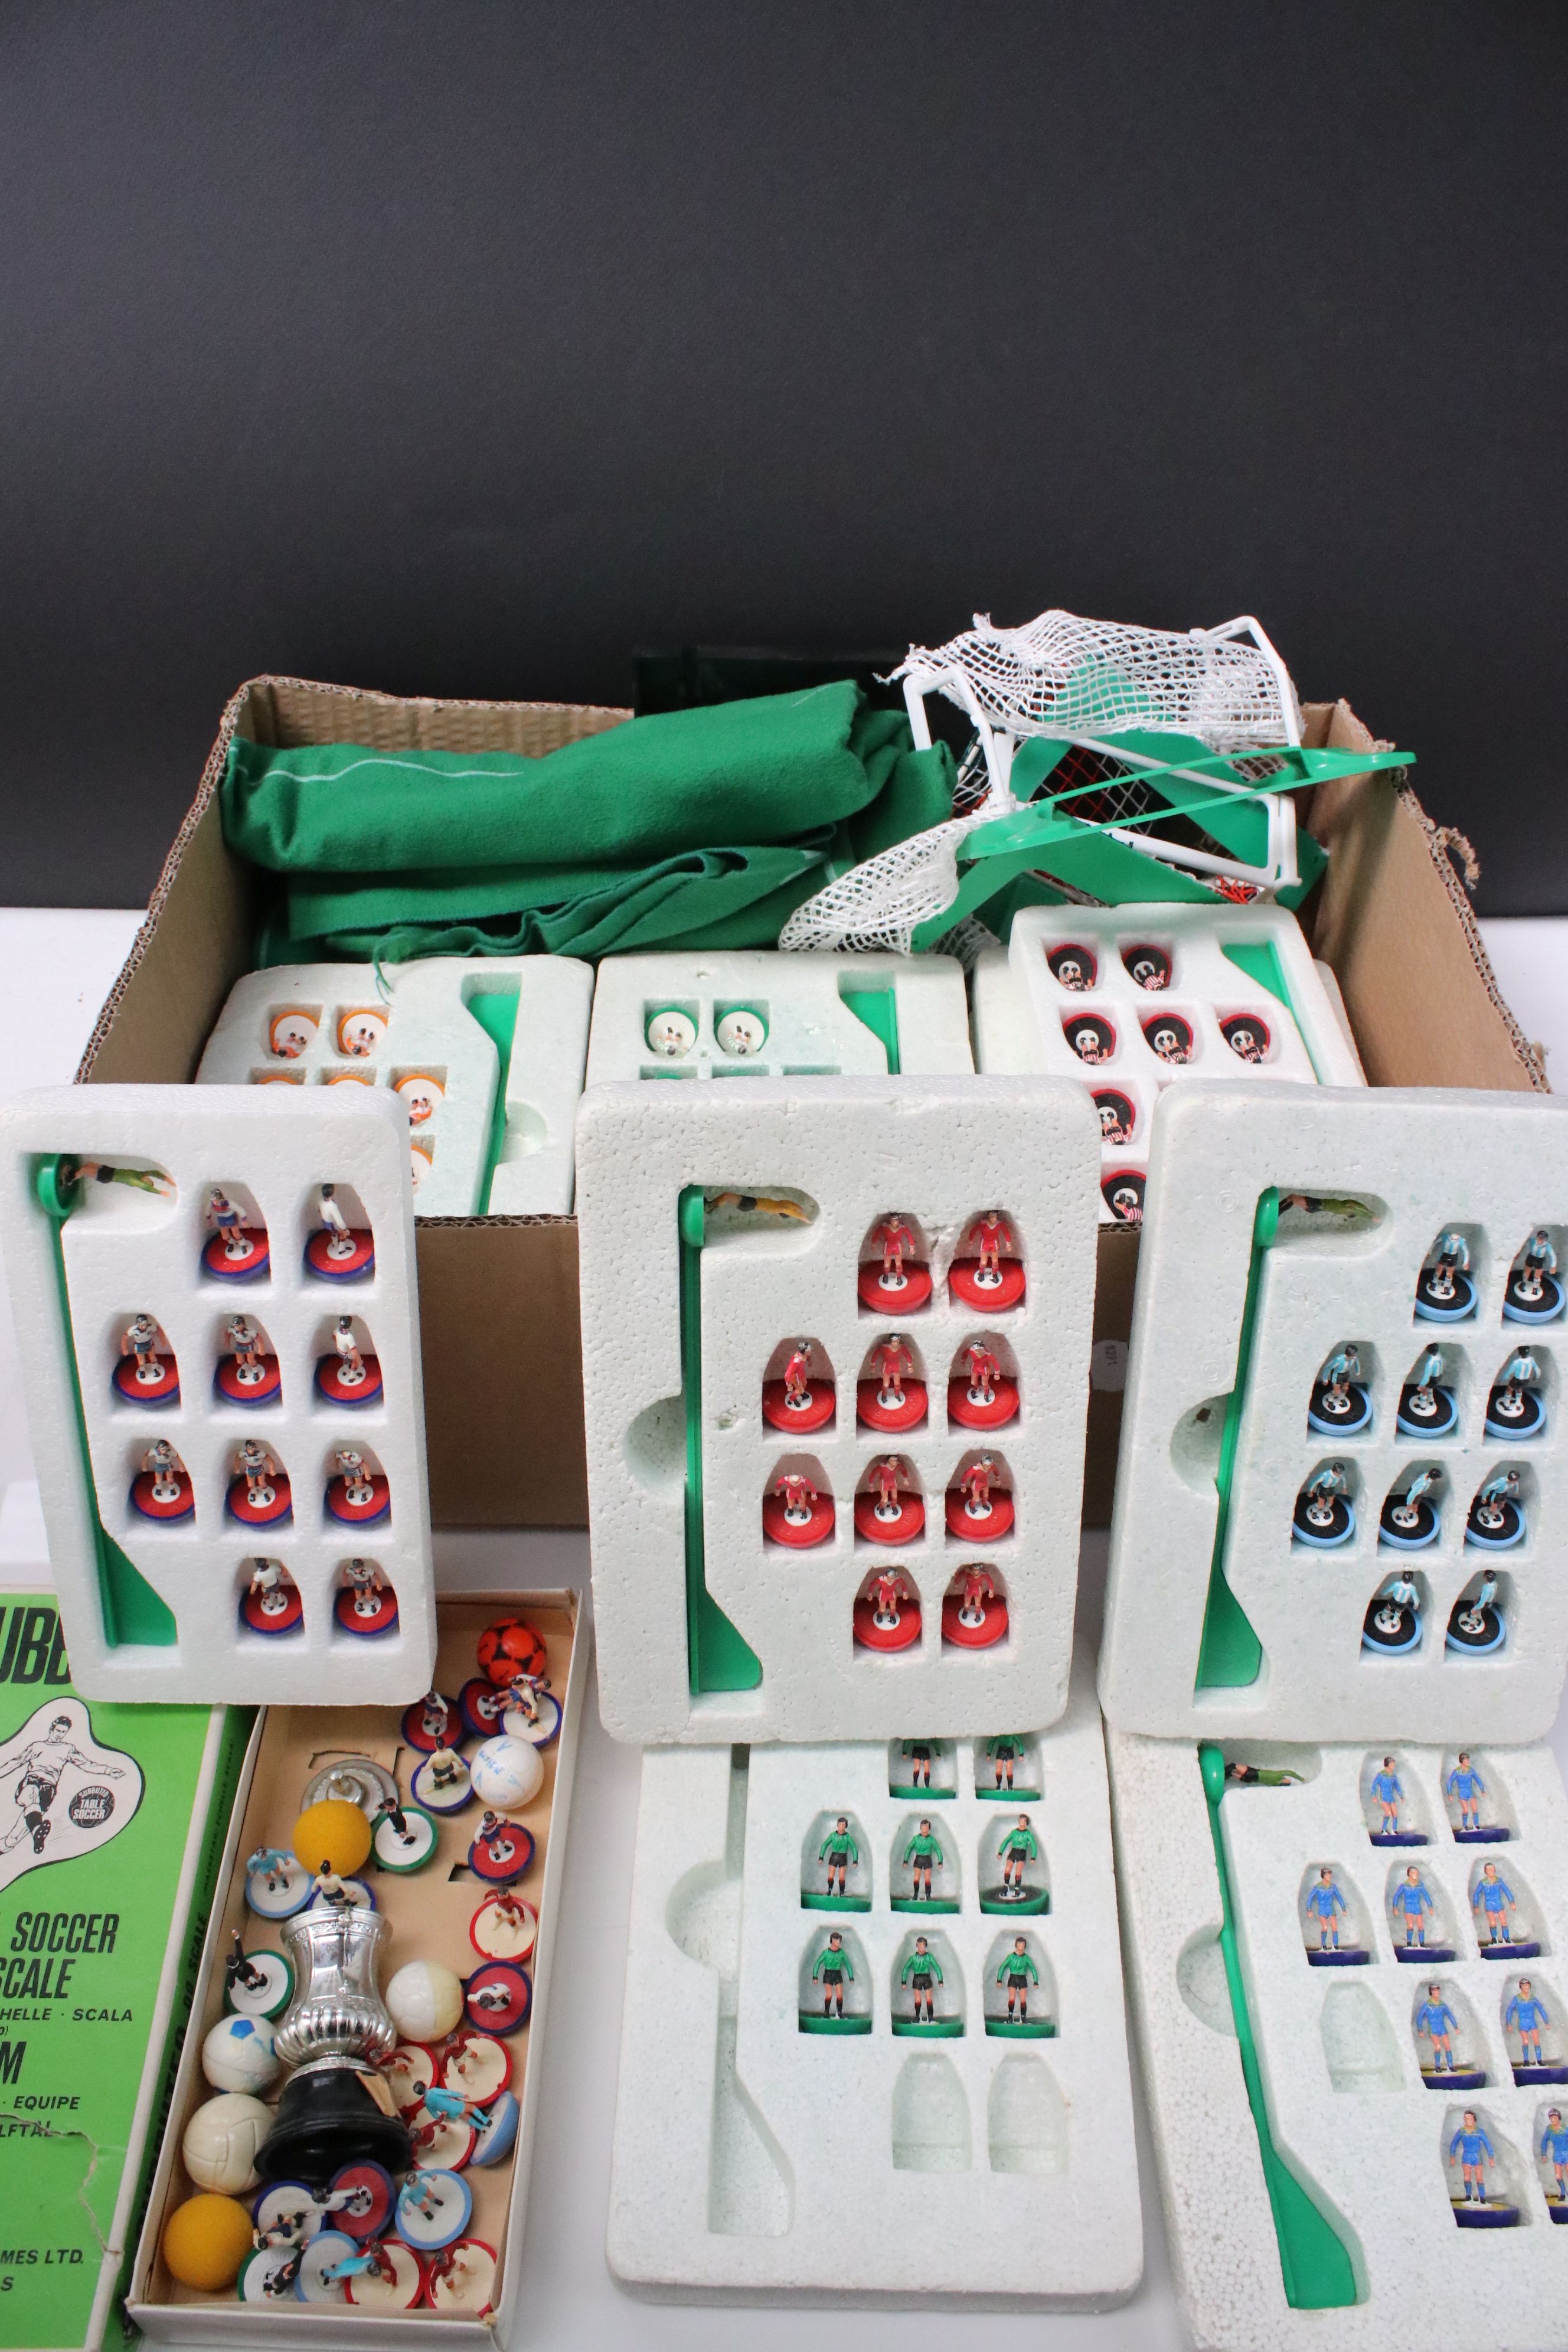 Subbuteo selection - 15 LW teams (some incomplete) to include Argentina, Brazil, Celtic, Arsenal